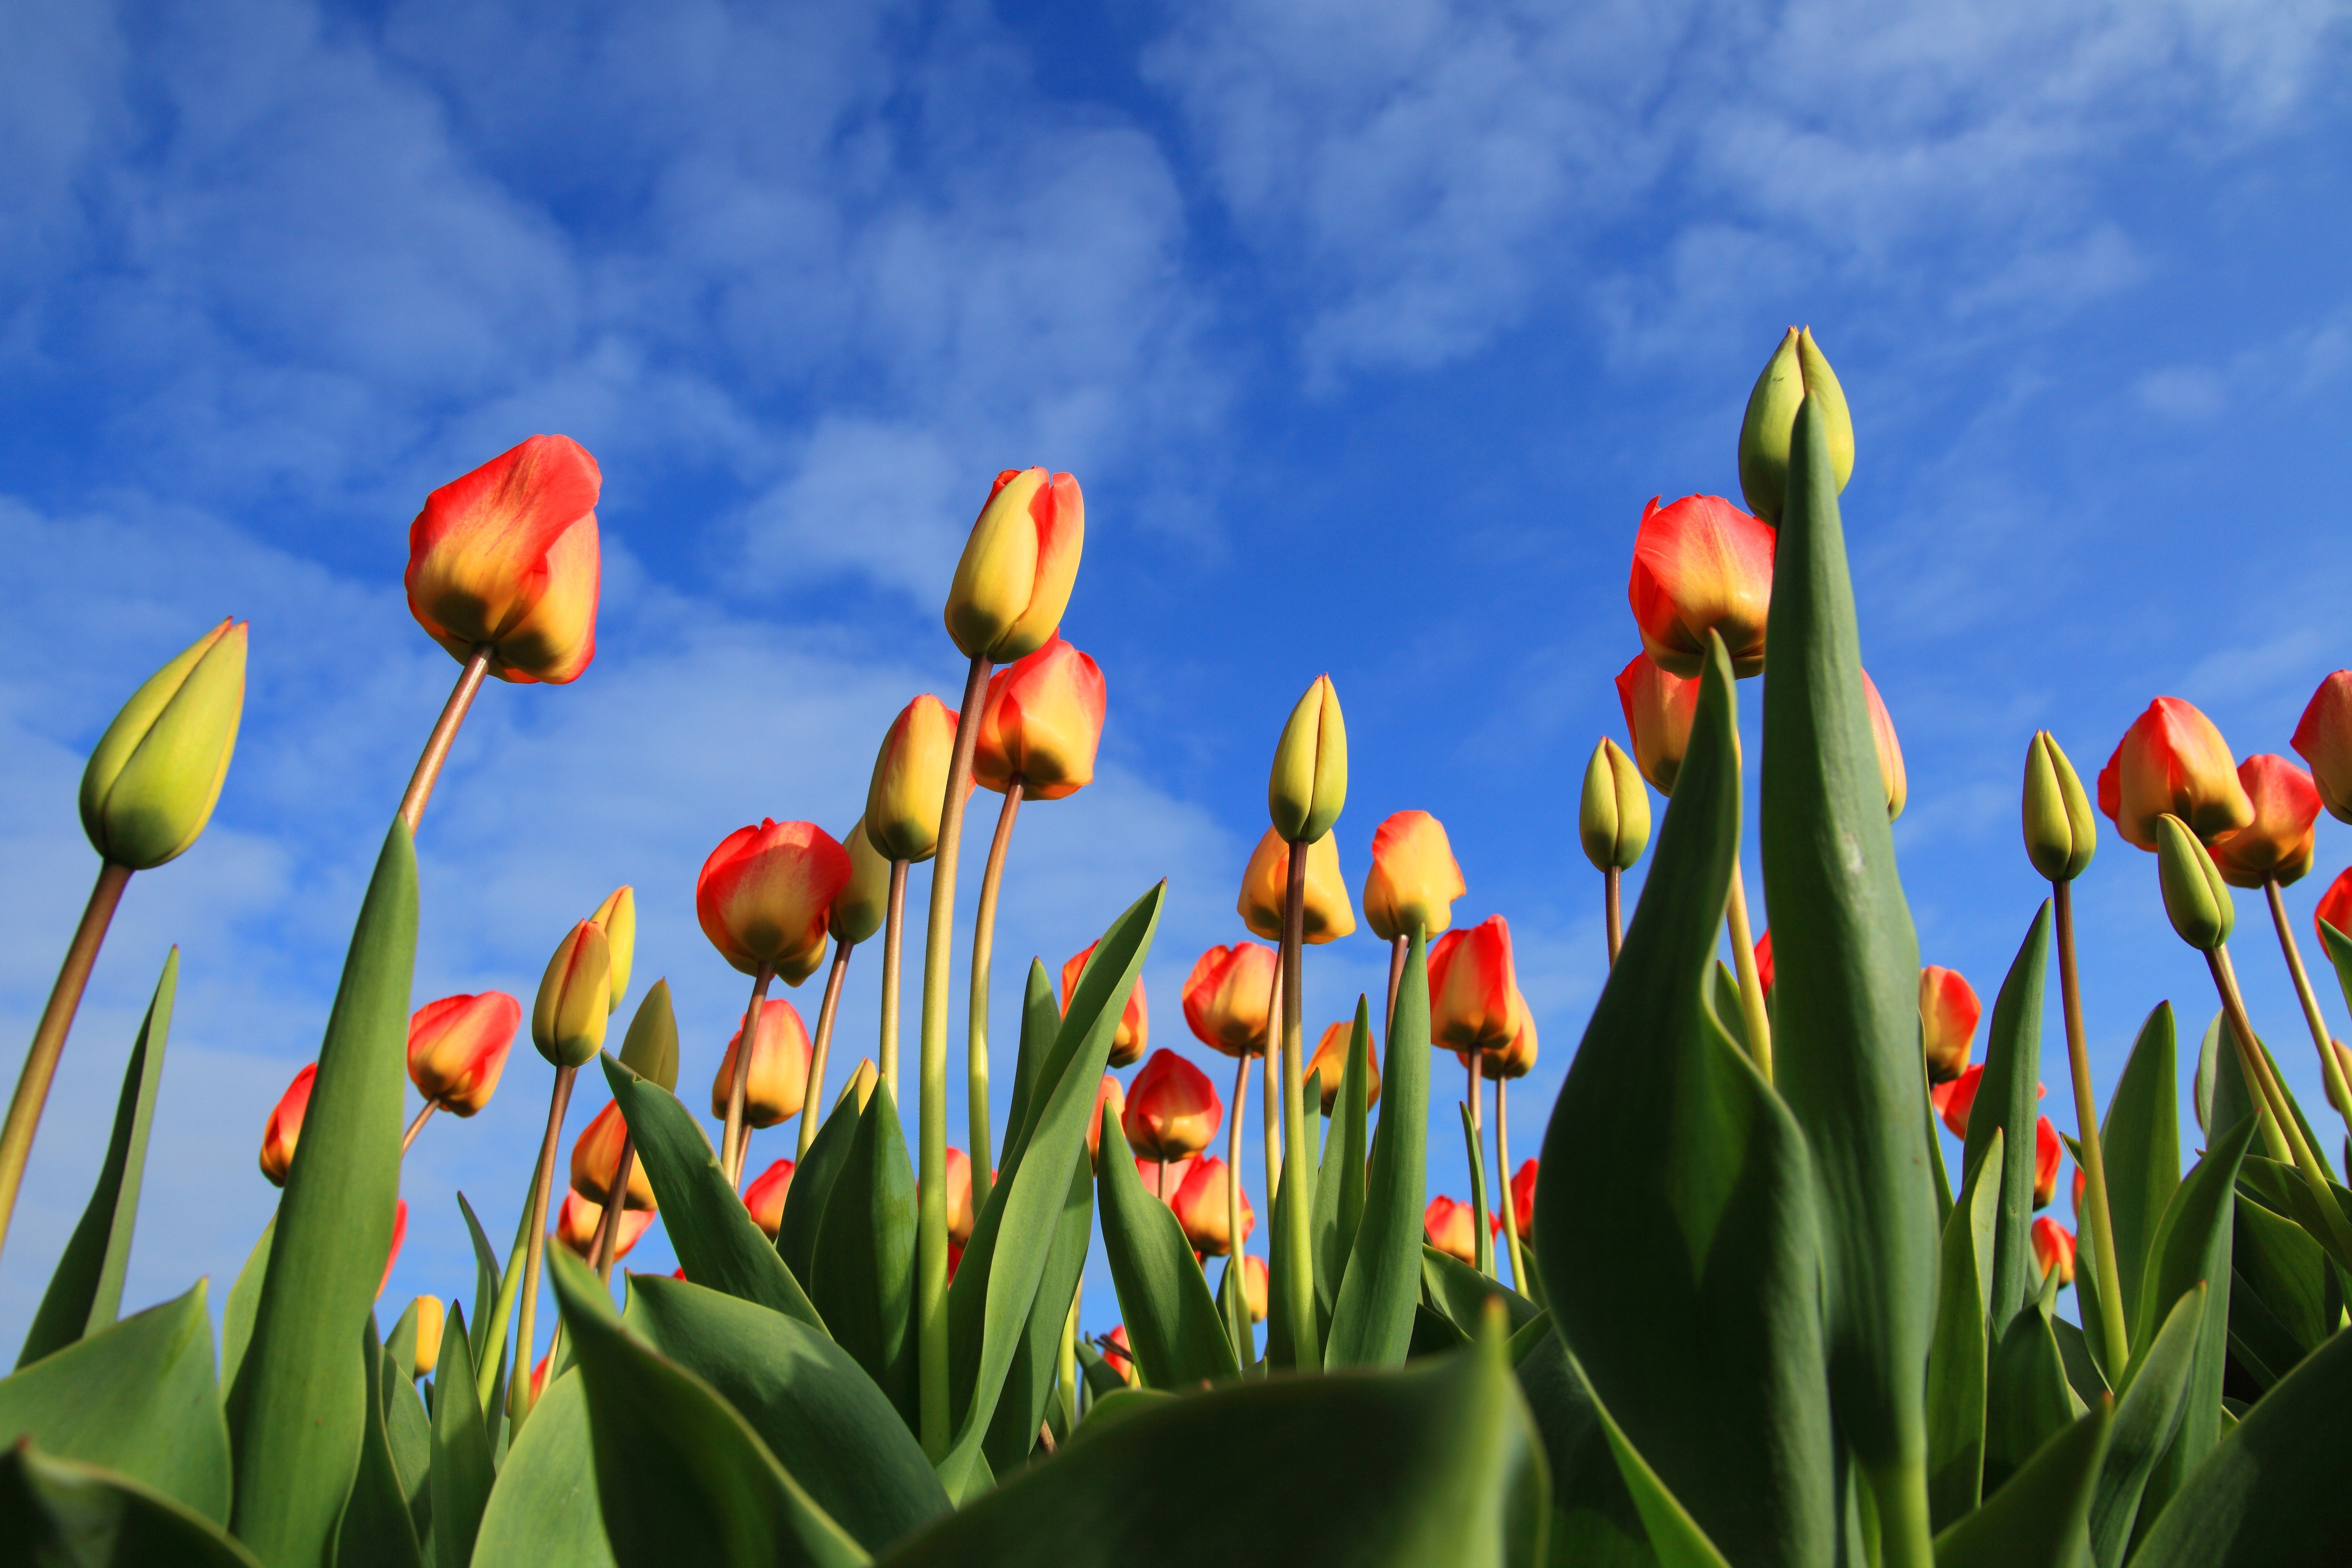 yellow and red flower garden under blue sky